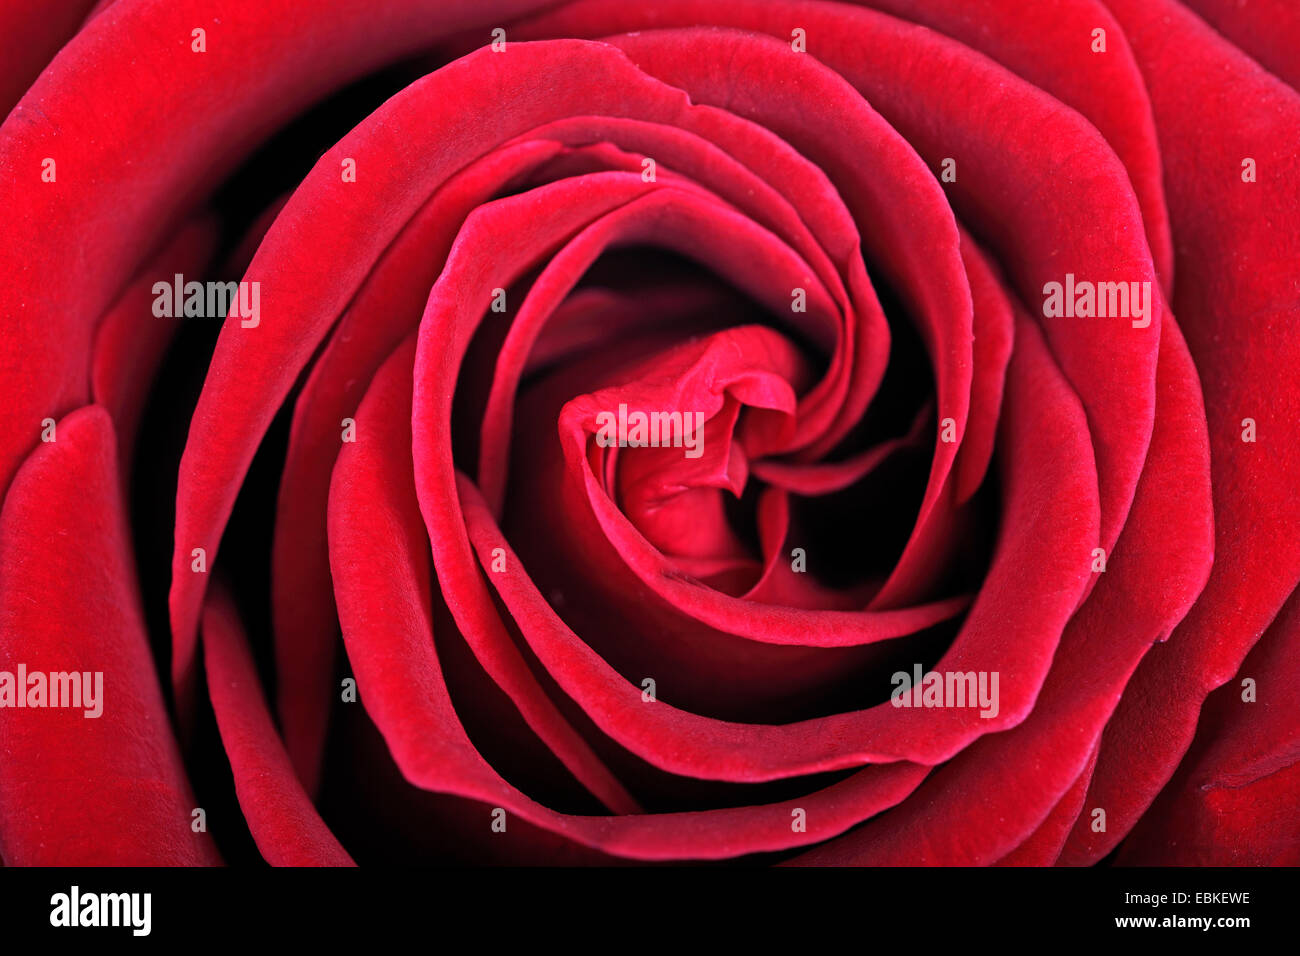 ornamental rose (Rosa spec.), detail of a red rose Stock Photo